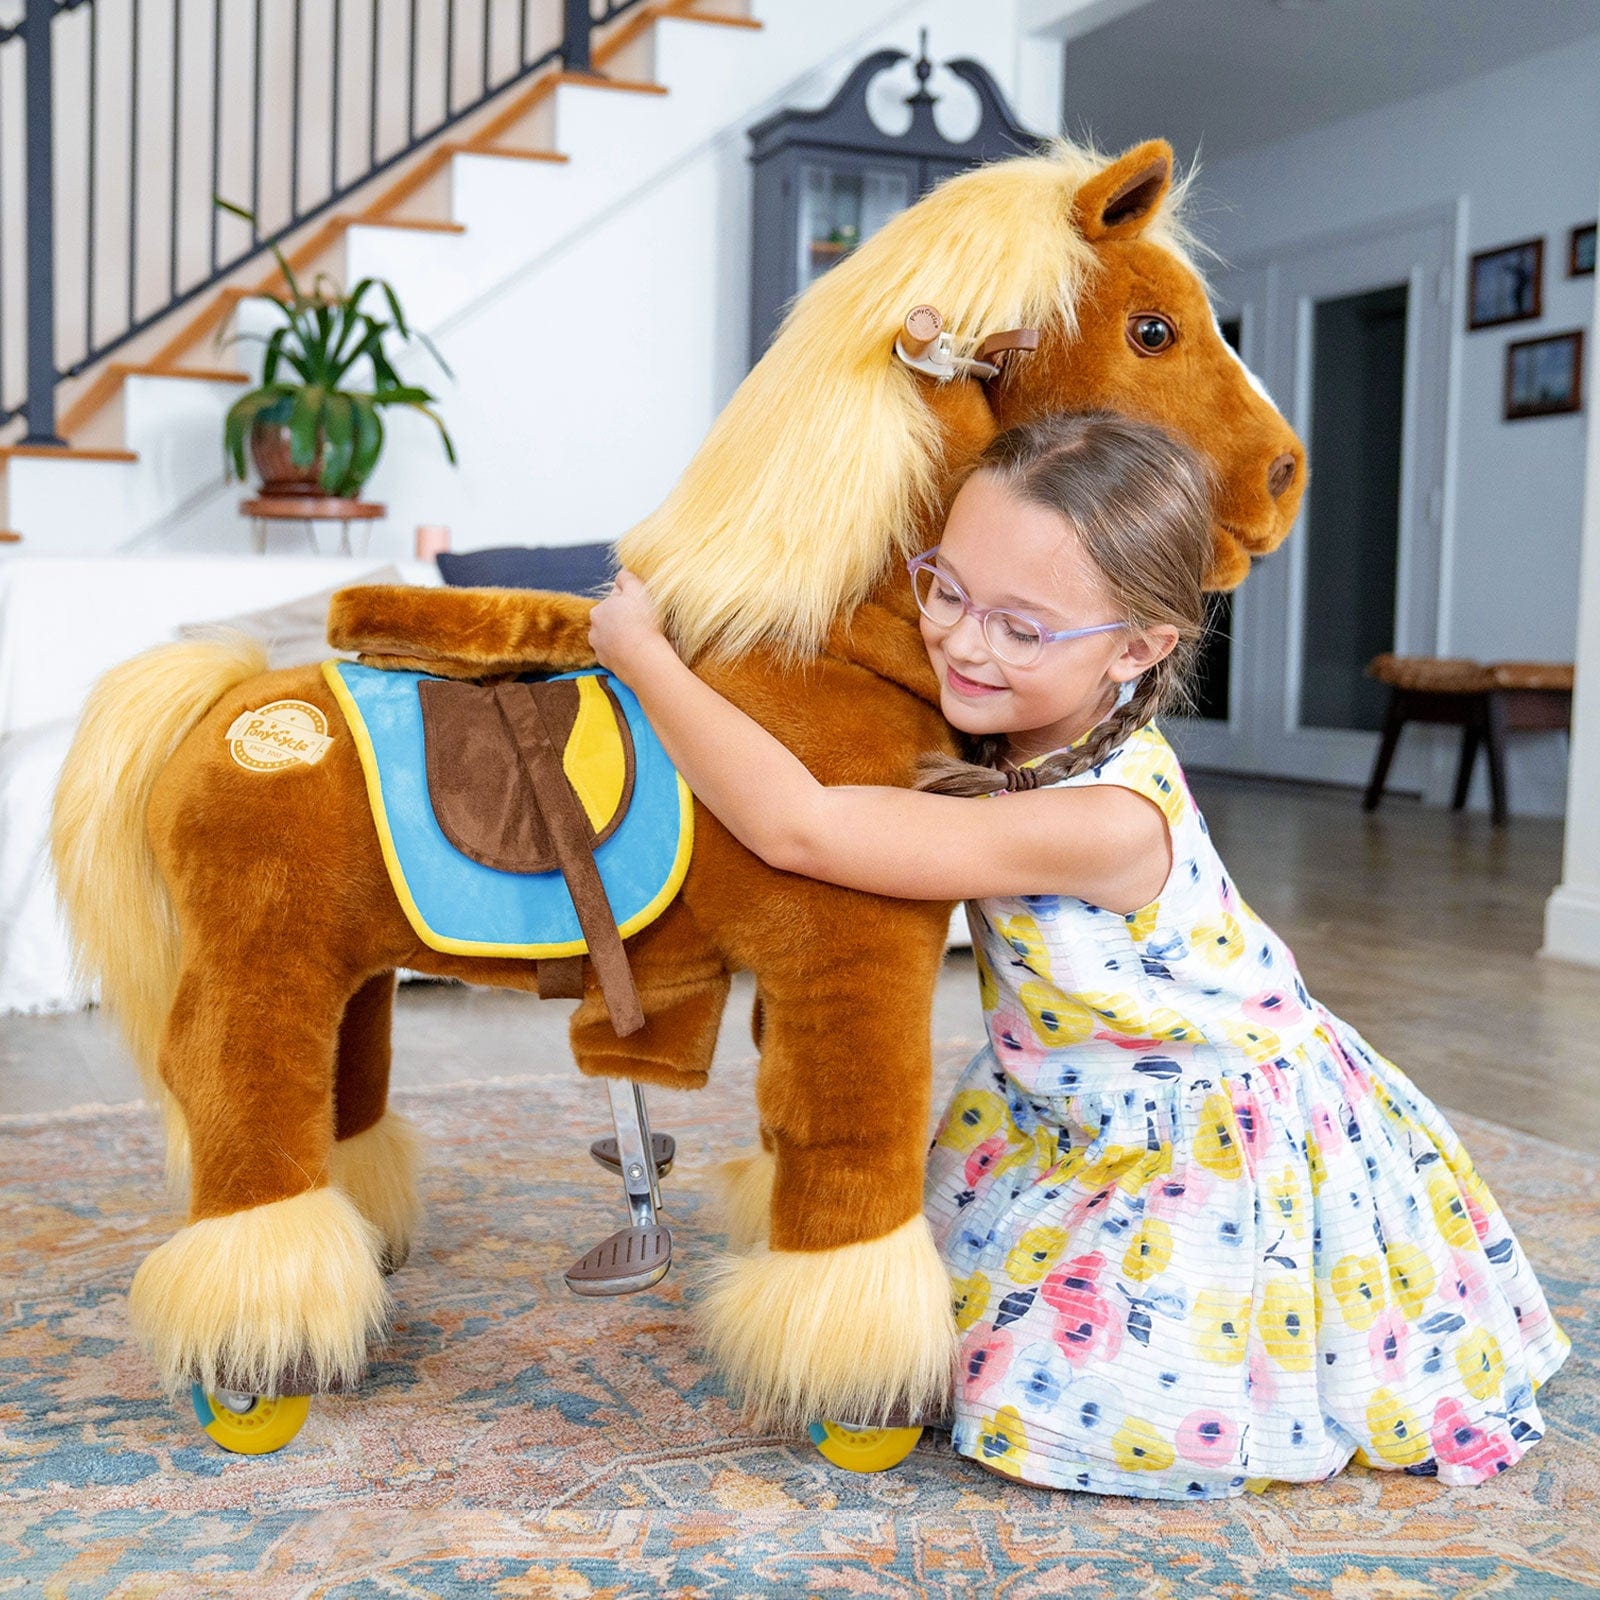 PonyCycle, Inc. Save 30% on Care & Feed Set - Model X Ride on Pony with Care & Feed Set